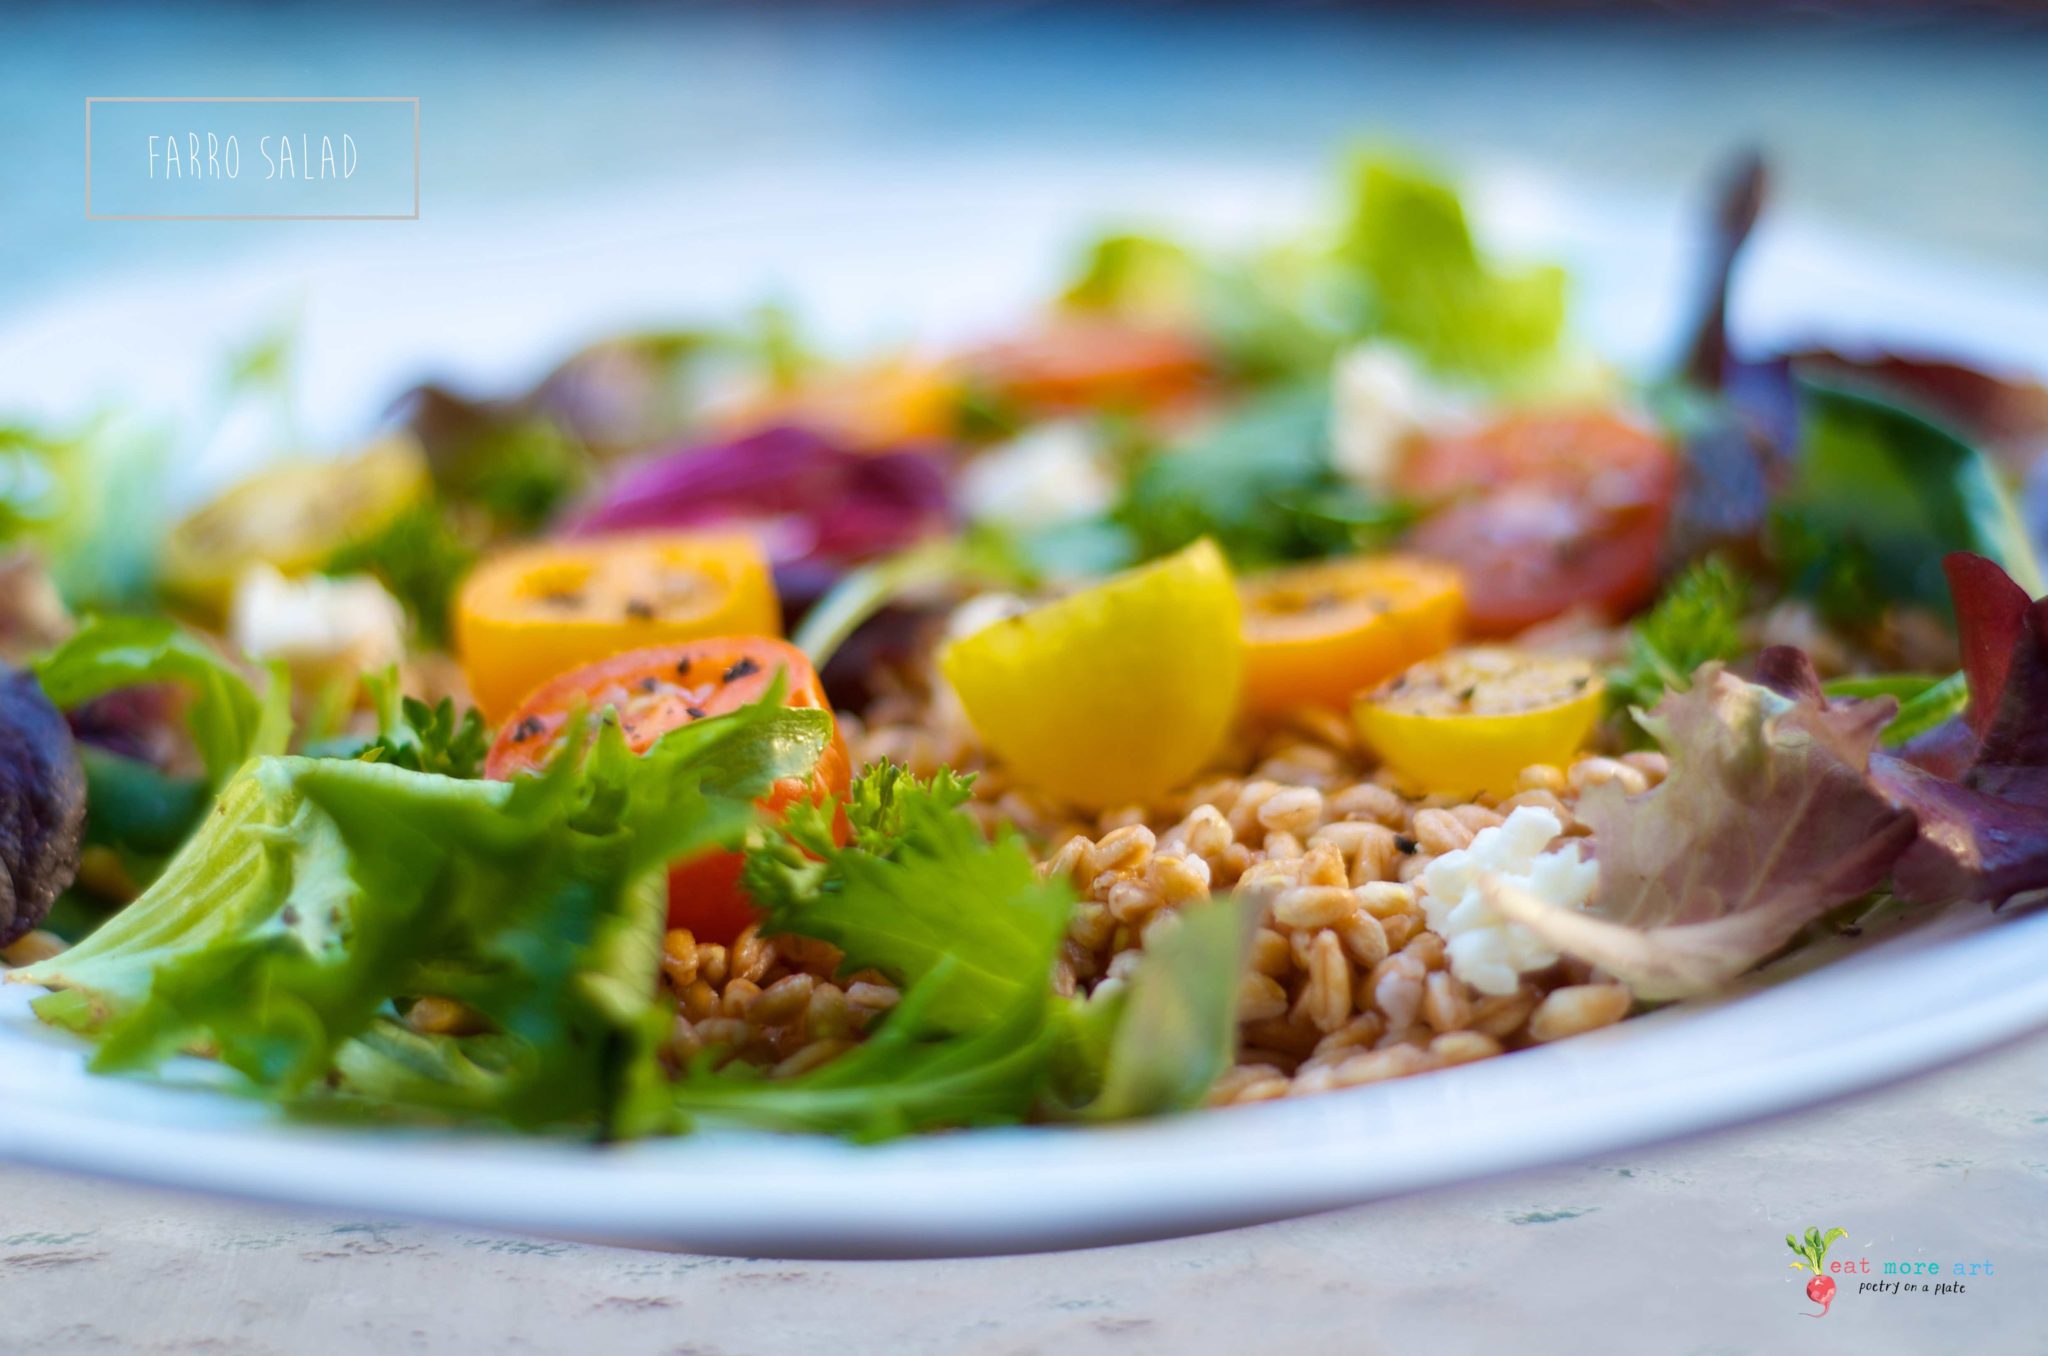 A plate of colorful farro salad